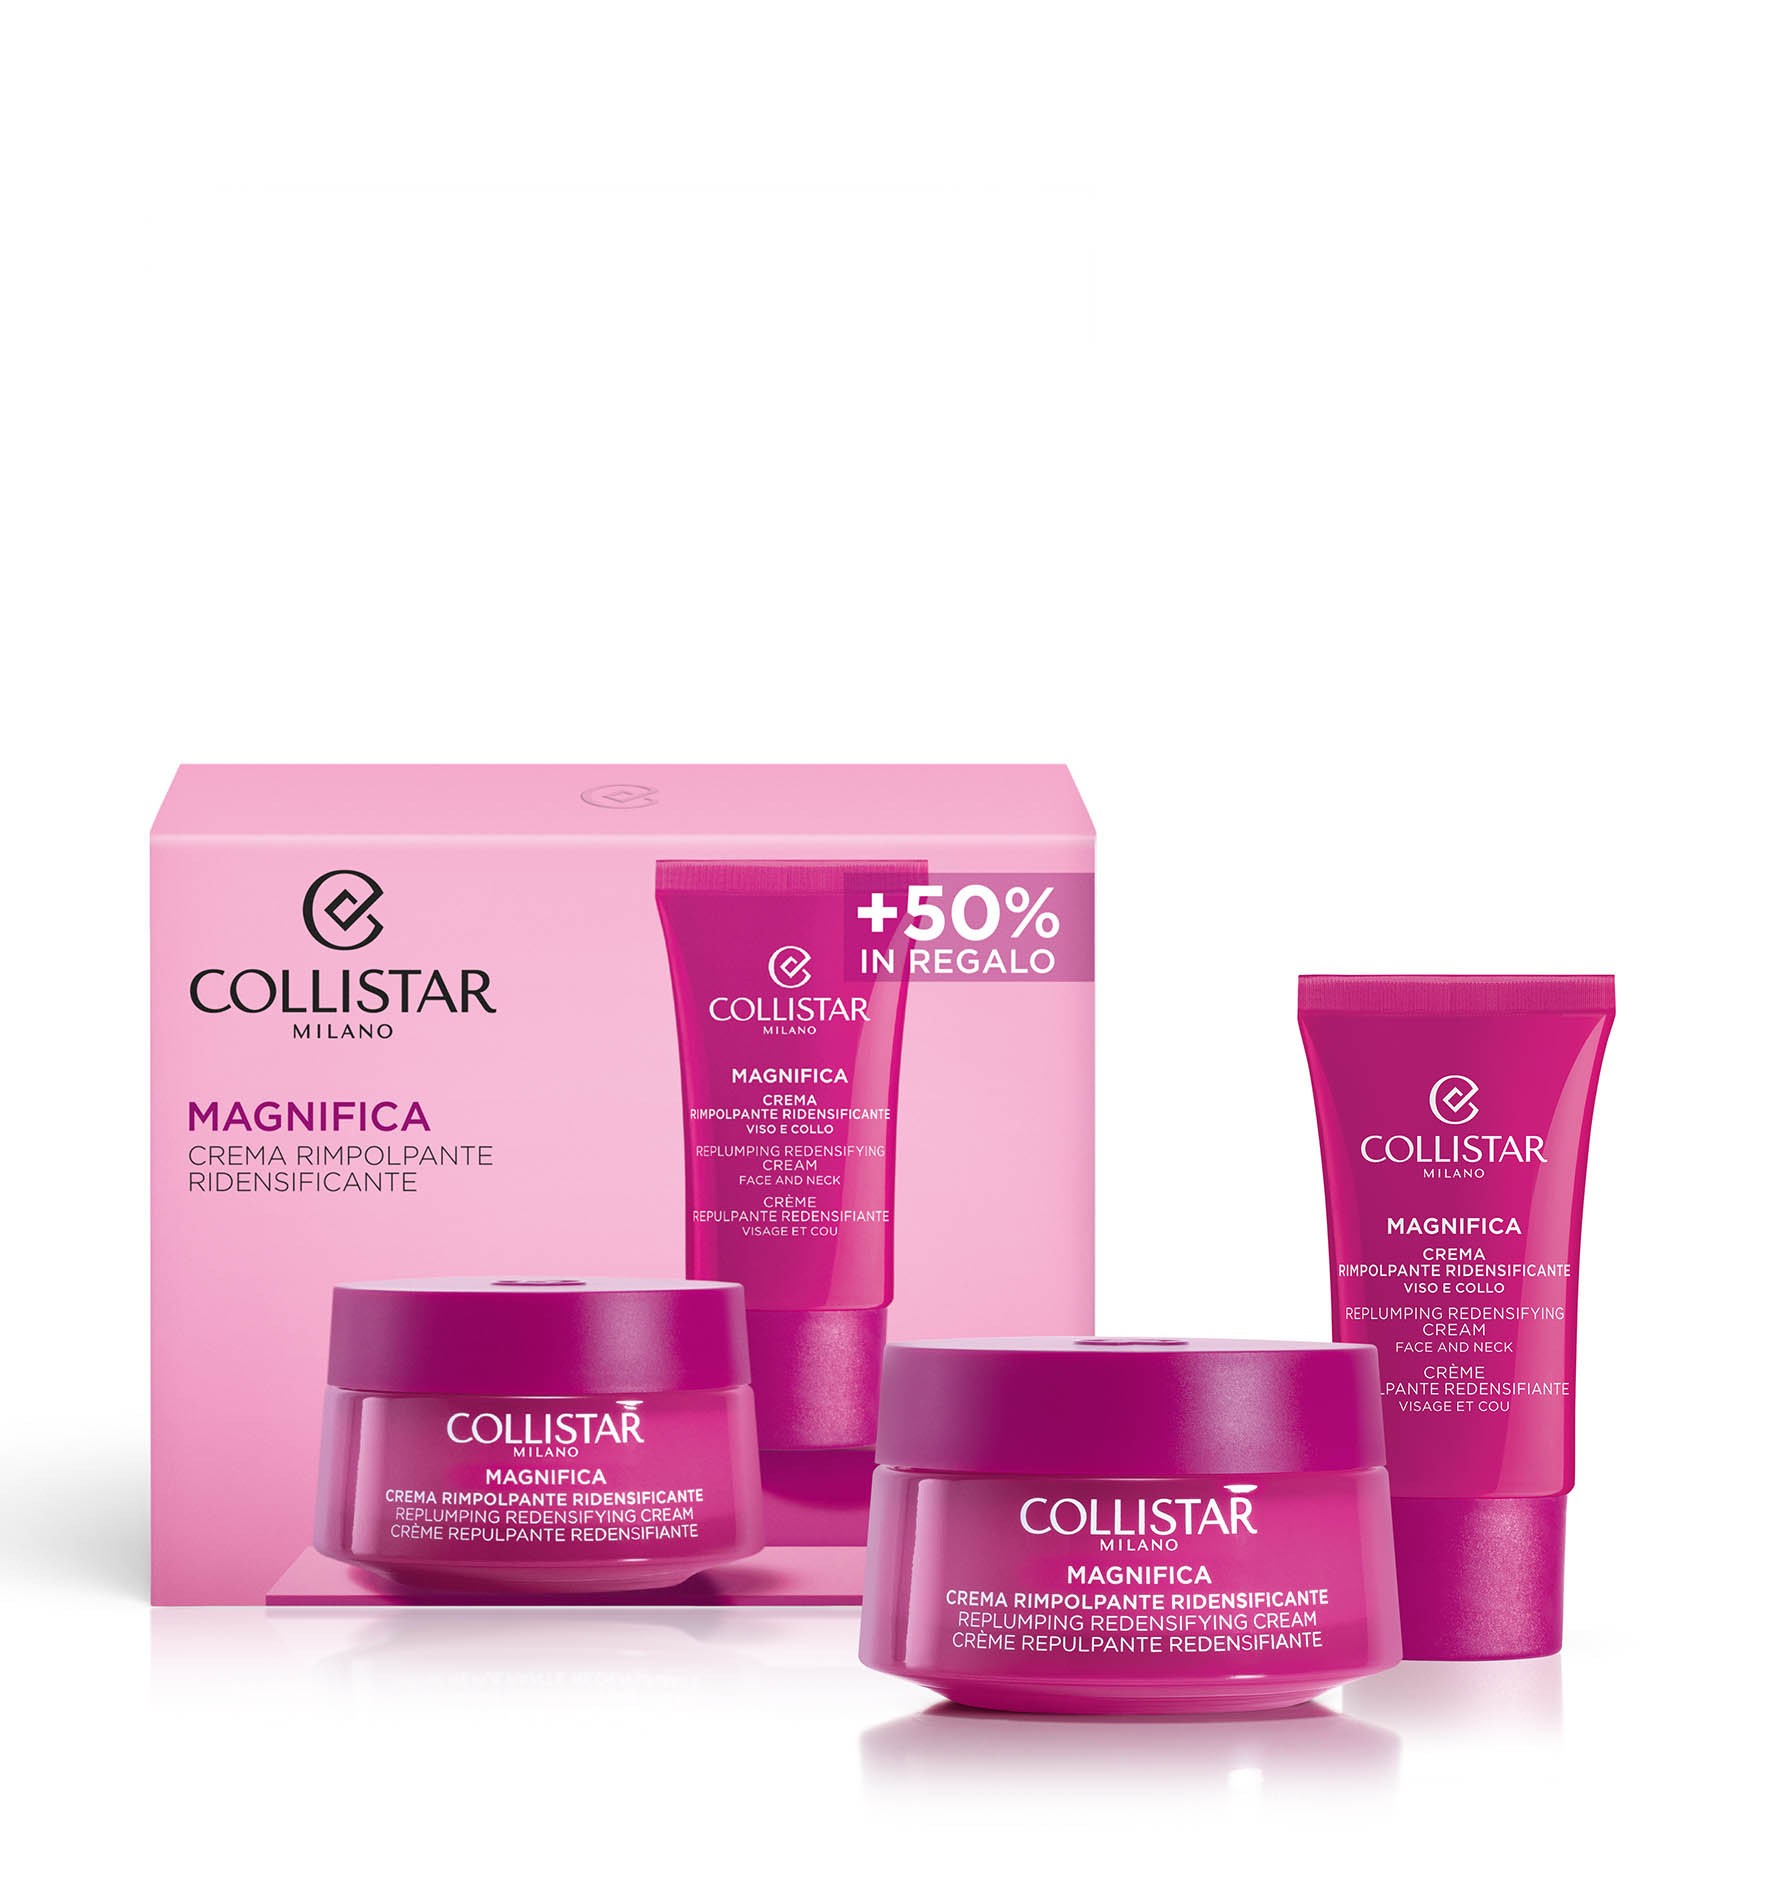 MAGNIFICA REPLUMPING REDENSIFYING CREAM 50 ml SET - PROMOTIONS | Collistar - Shop Online Ufficiale